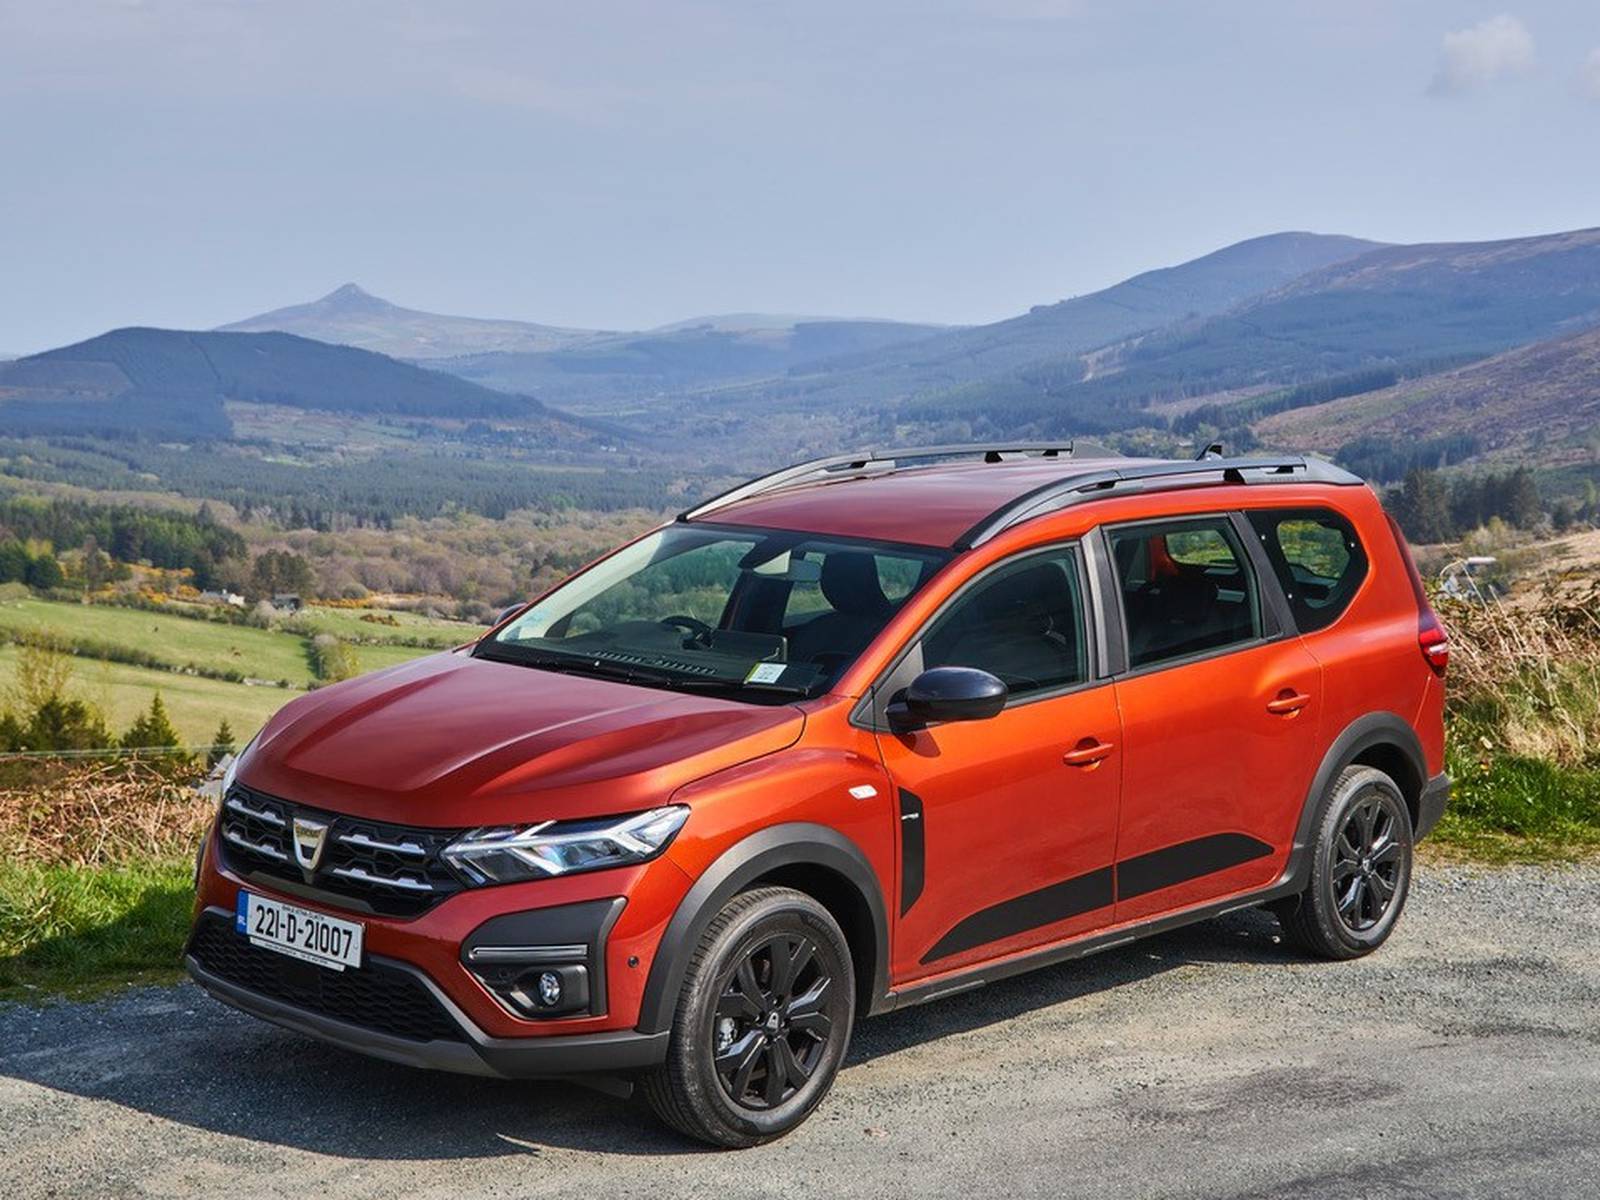 Dacia Jogger, with 7 seats and low price, enters hot compact SUV